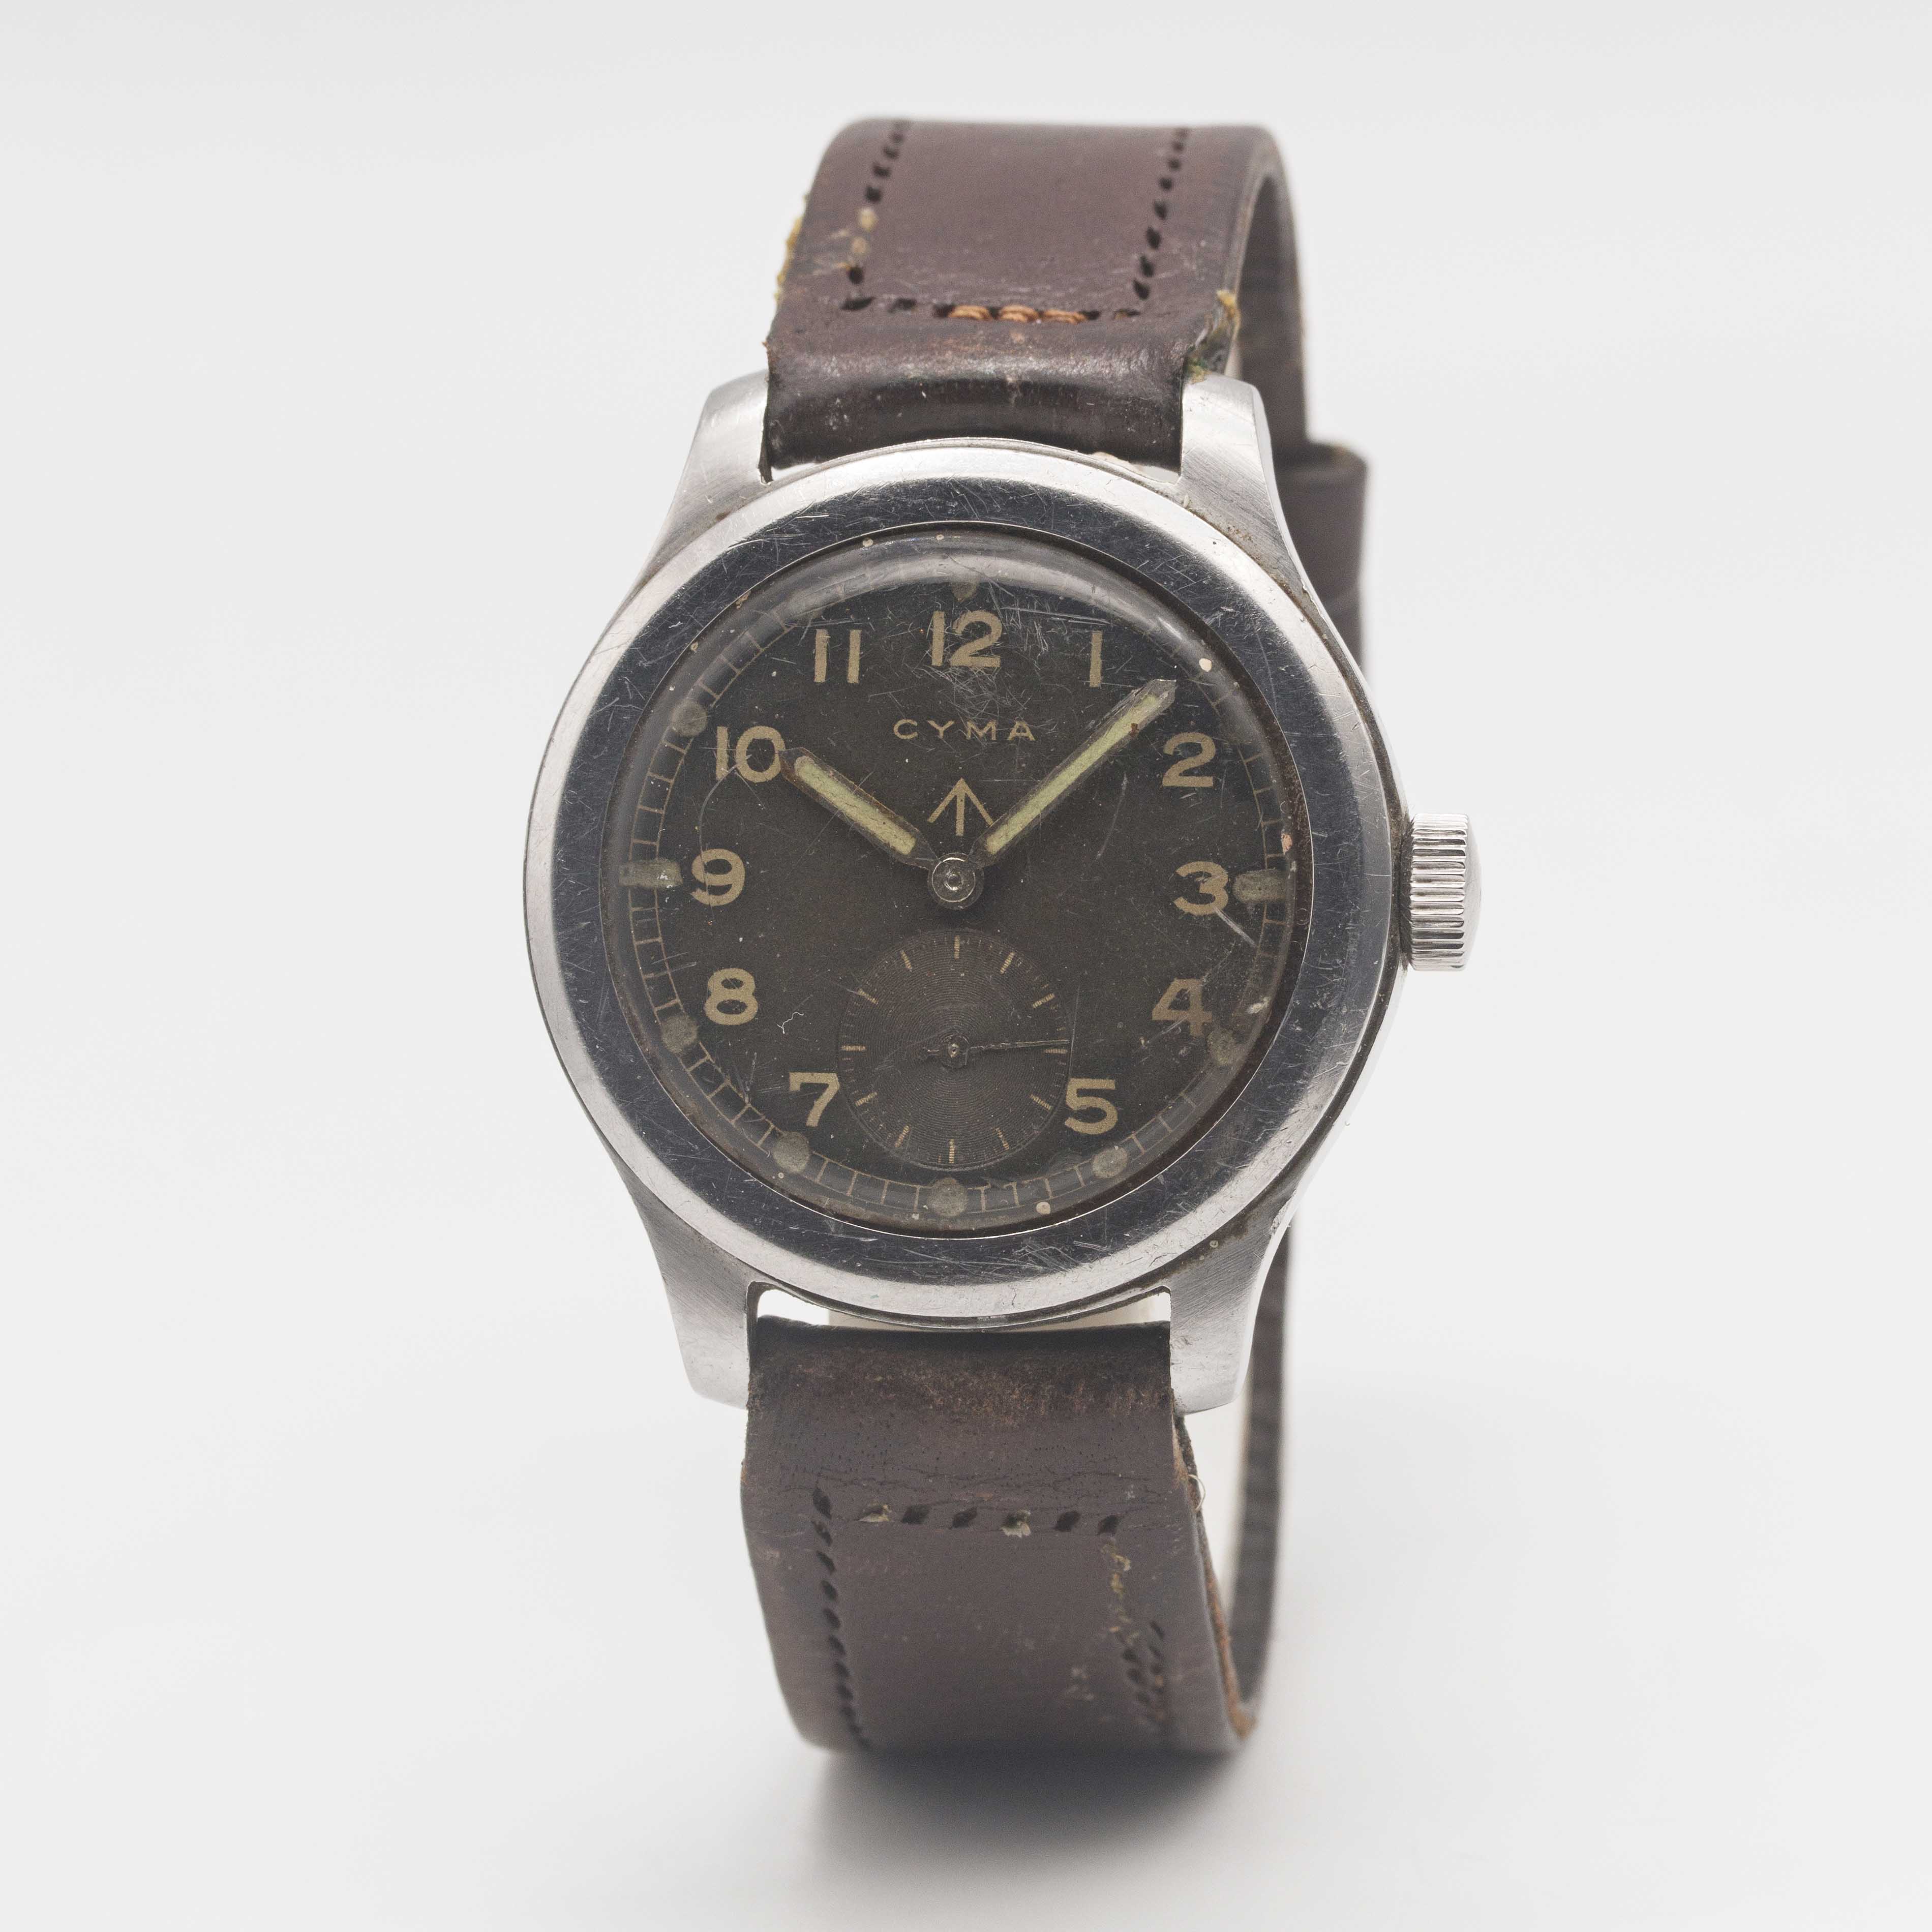 A GENTLEMAN'S STAINLESS STEEL BRITISH MILITARY CYMA W.W.W. WRIST WATCH CIRCA 1945, PART OF THE " - Image 4 of 9